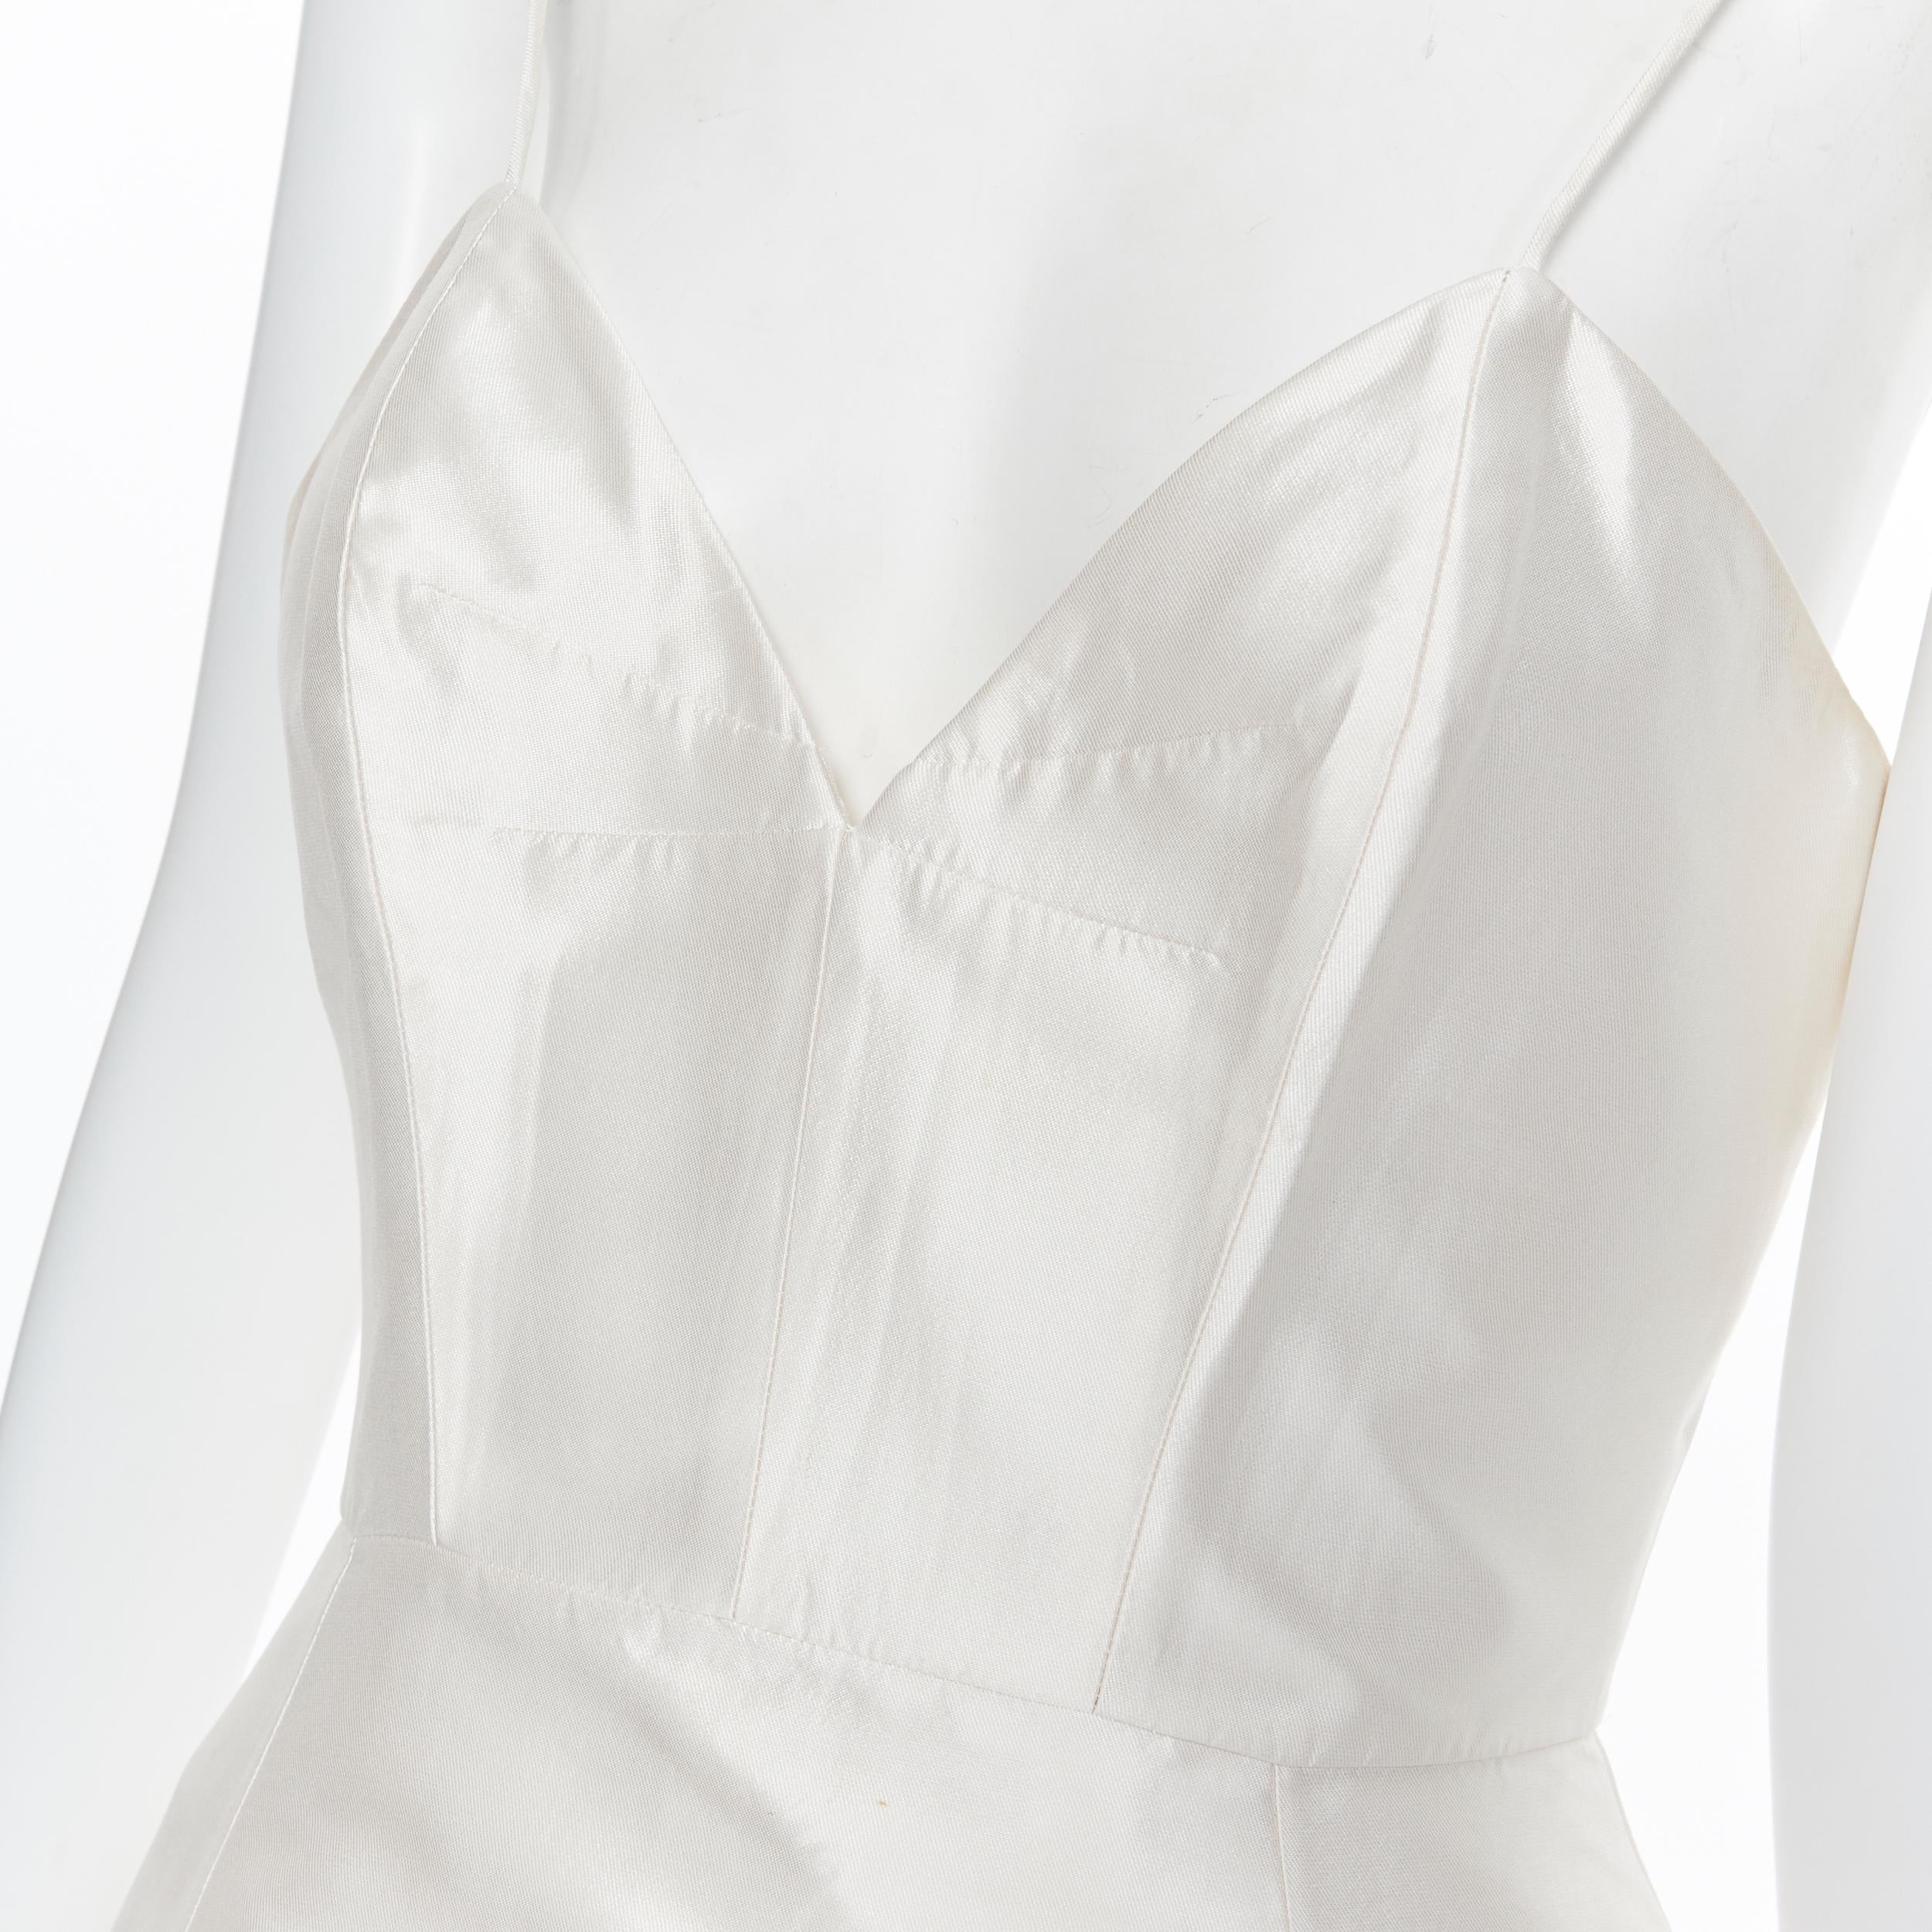 CHRISTIAN DIOR ivory sweetheart spaghetti strap fit flared mini dress FR42 L
Brand: Christian Dior
Model Name / Style: Fit flared dress
Material: Silk
Color: White
Pattern: Solid
Closure: Zip
Extra Detail: Angular neckline. Fitted waist. Sleeveless.